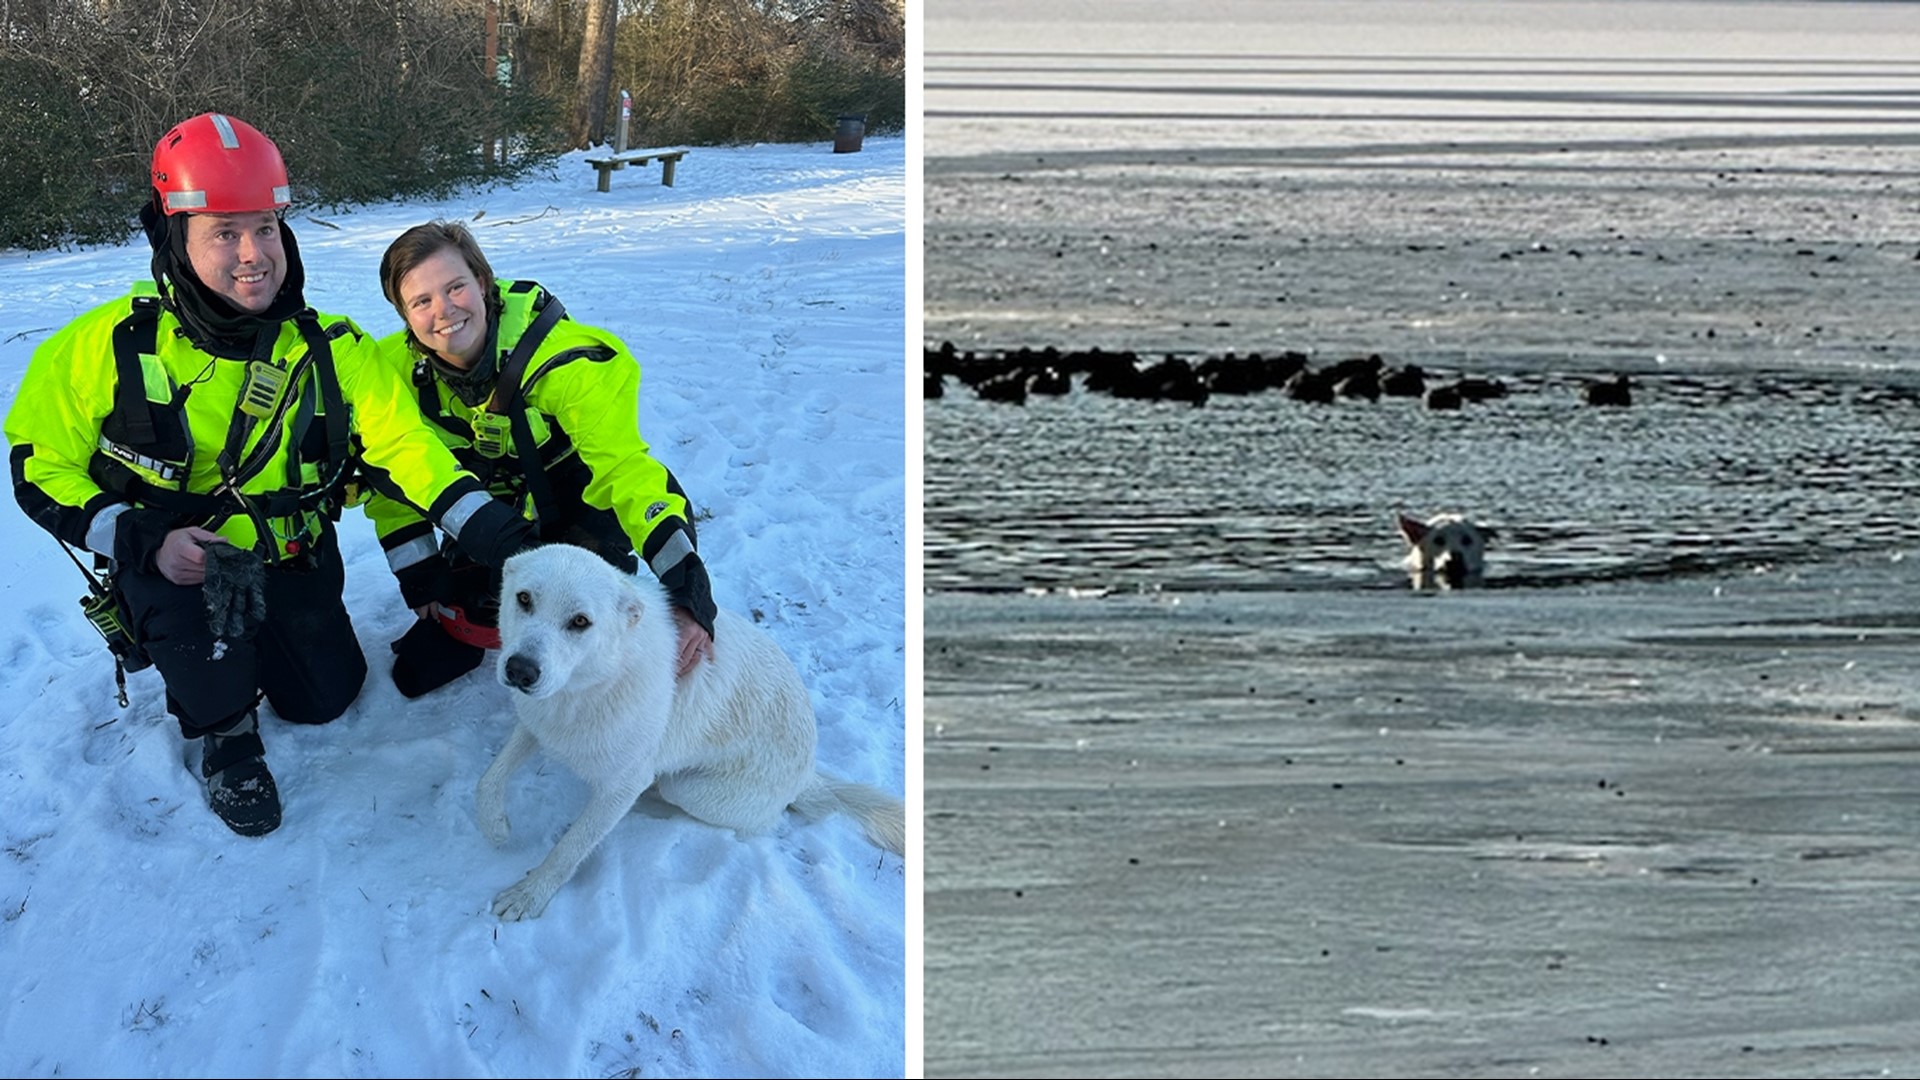 An Arkansas team rescued a dog from the icy water at Lake Fayetteville.